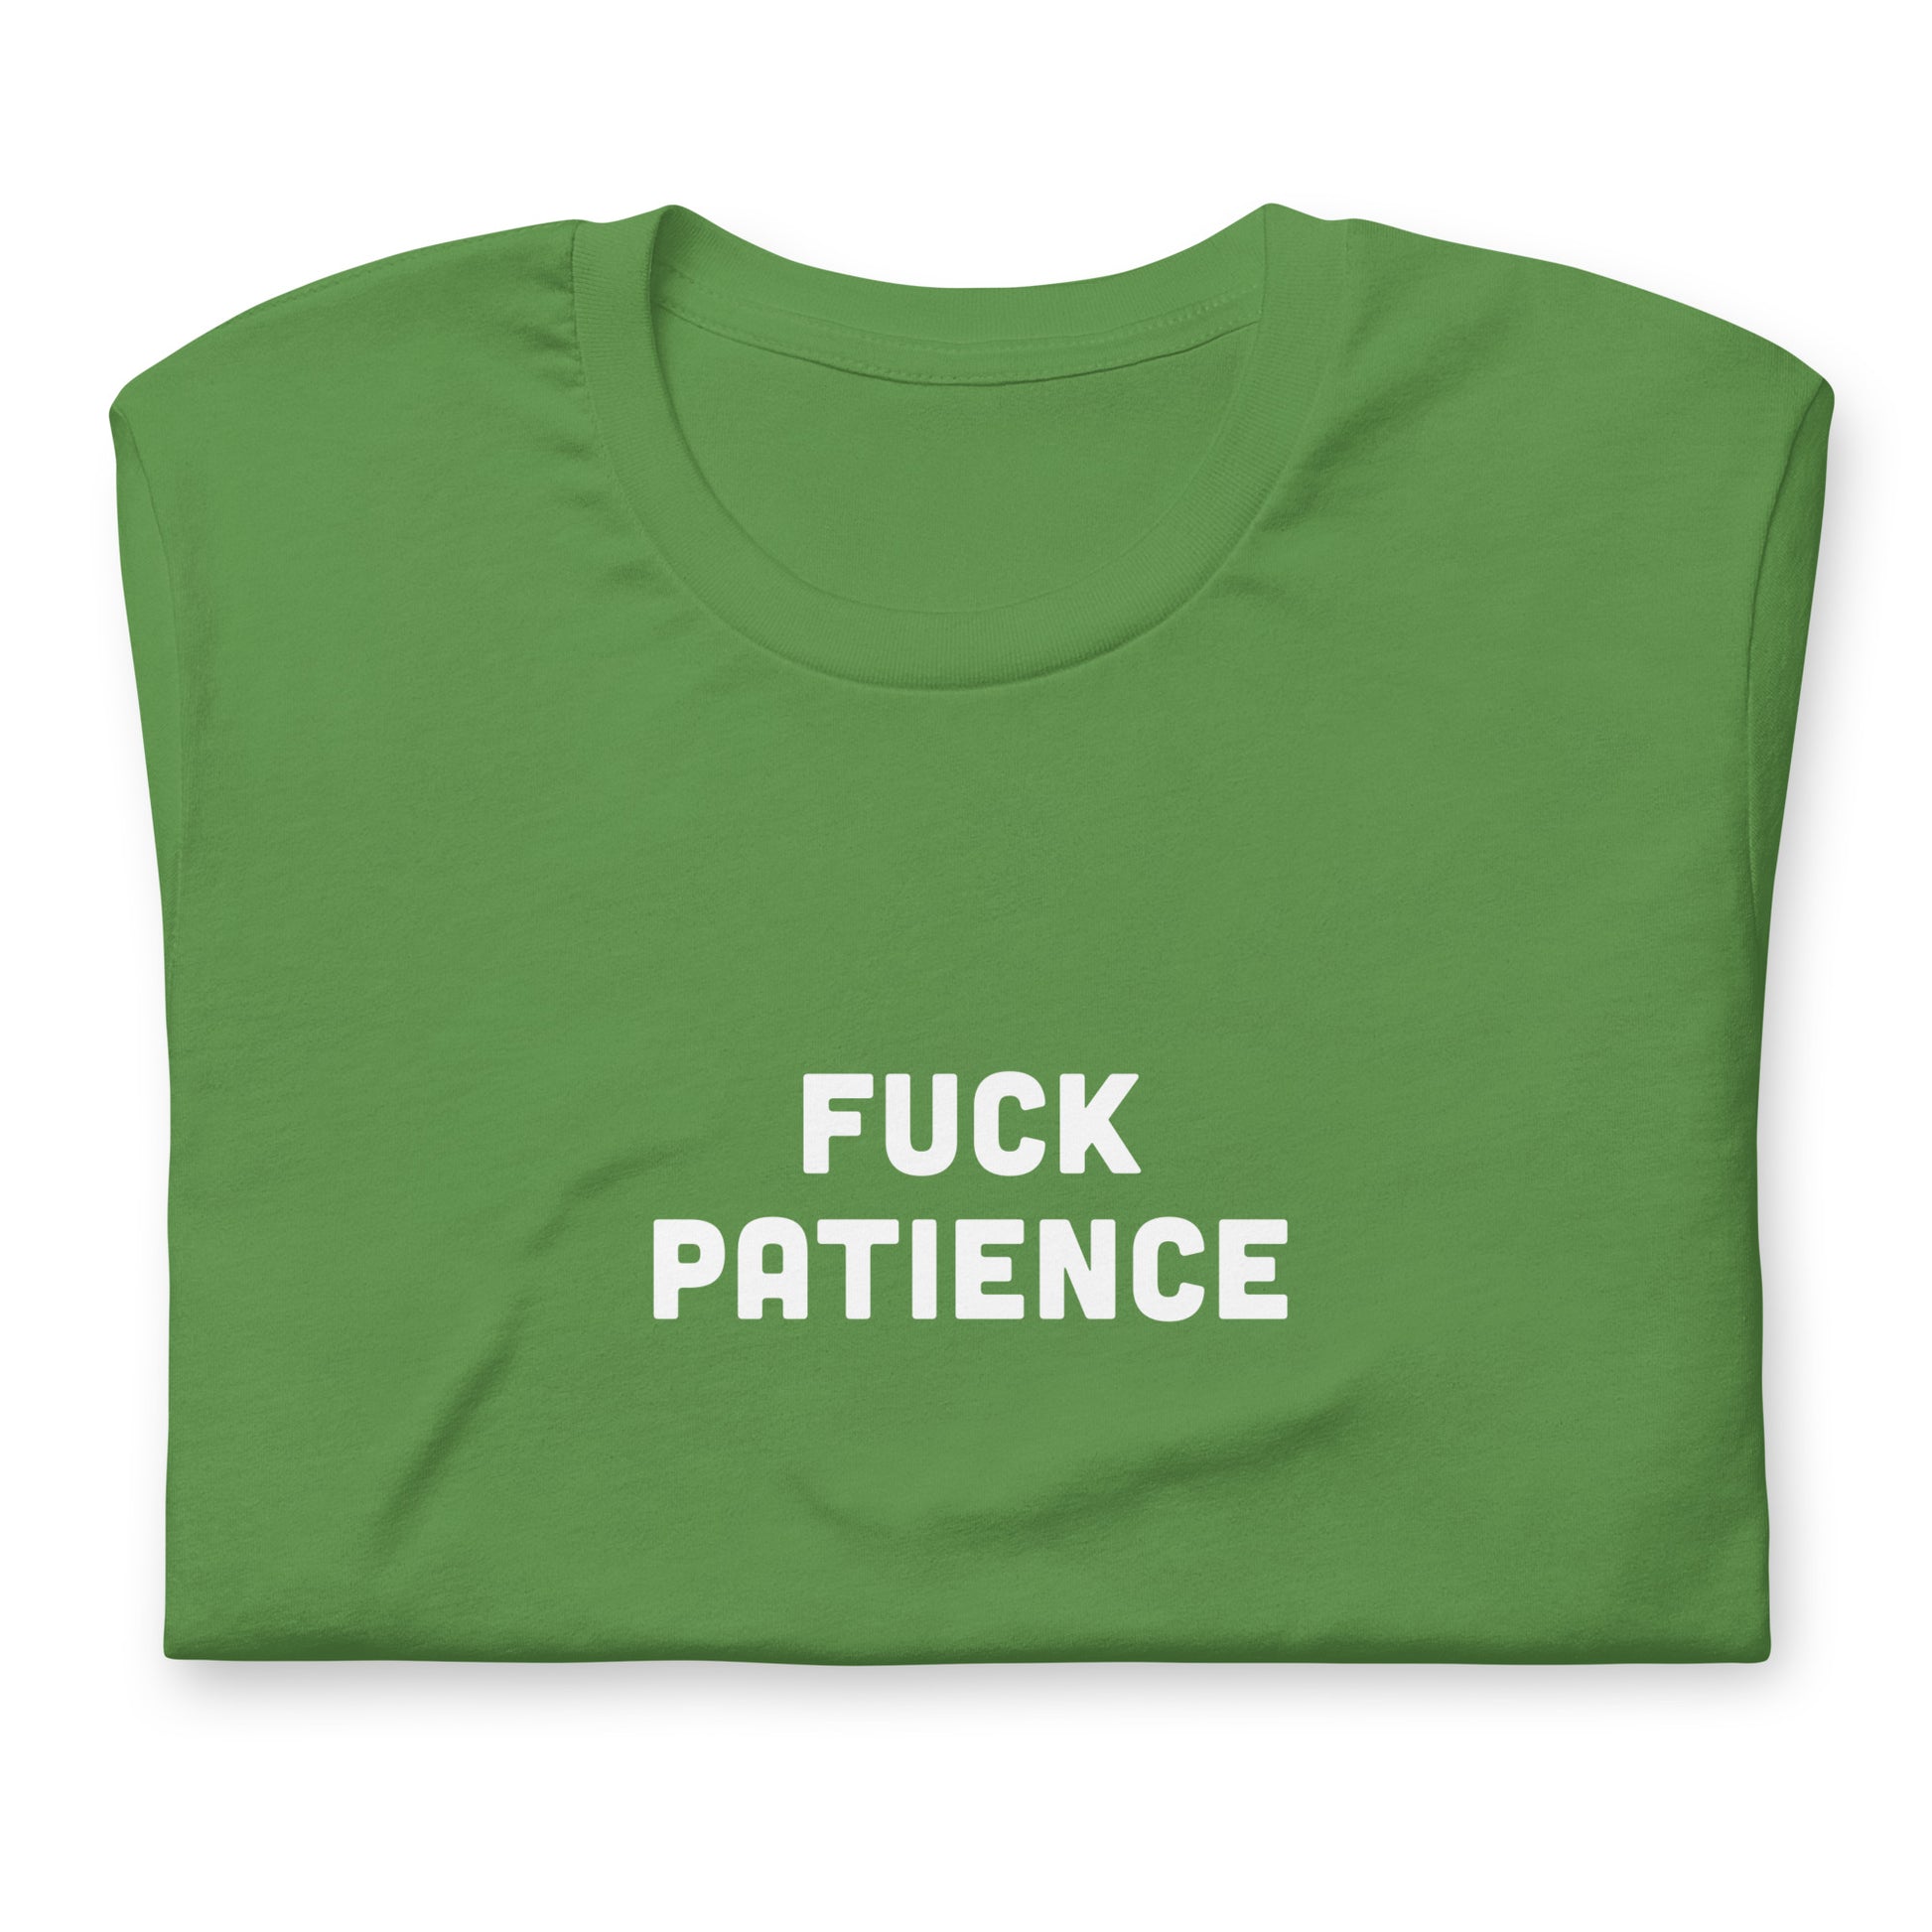 Fuck Patience T-Shirt Size 2XL Color Navy